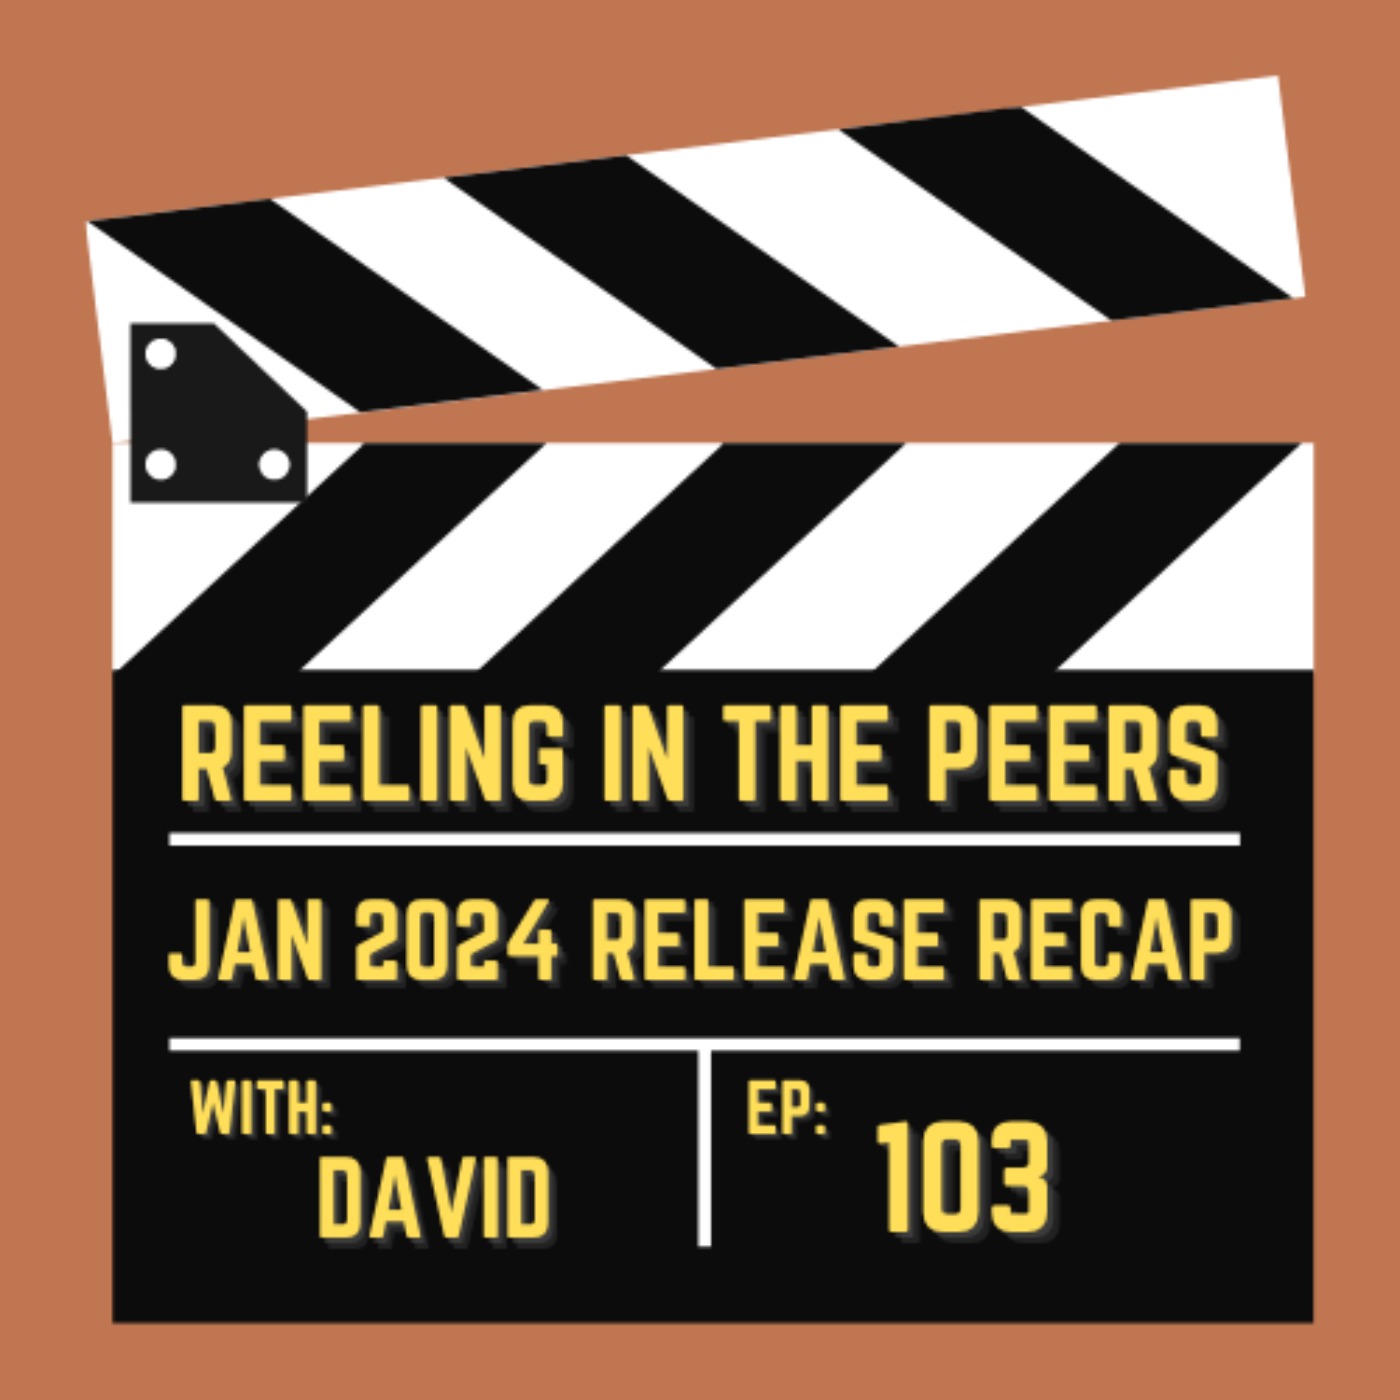 103 Poor Things, All of Us Strangers, The Holdovers and More! - January 2024 Release Recap